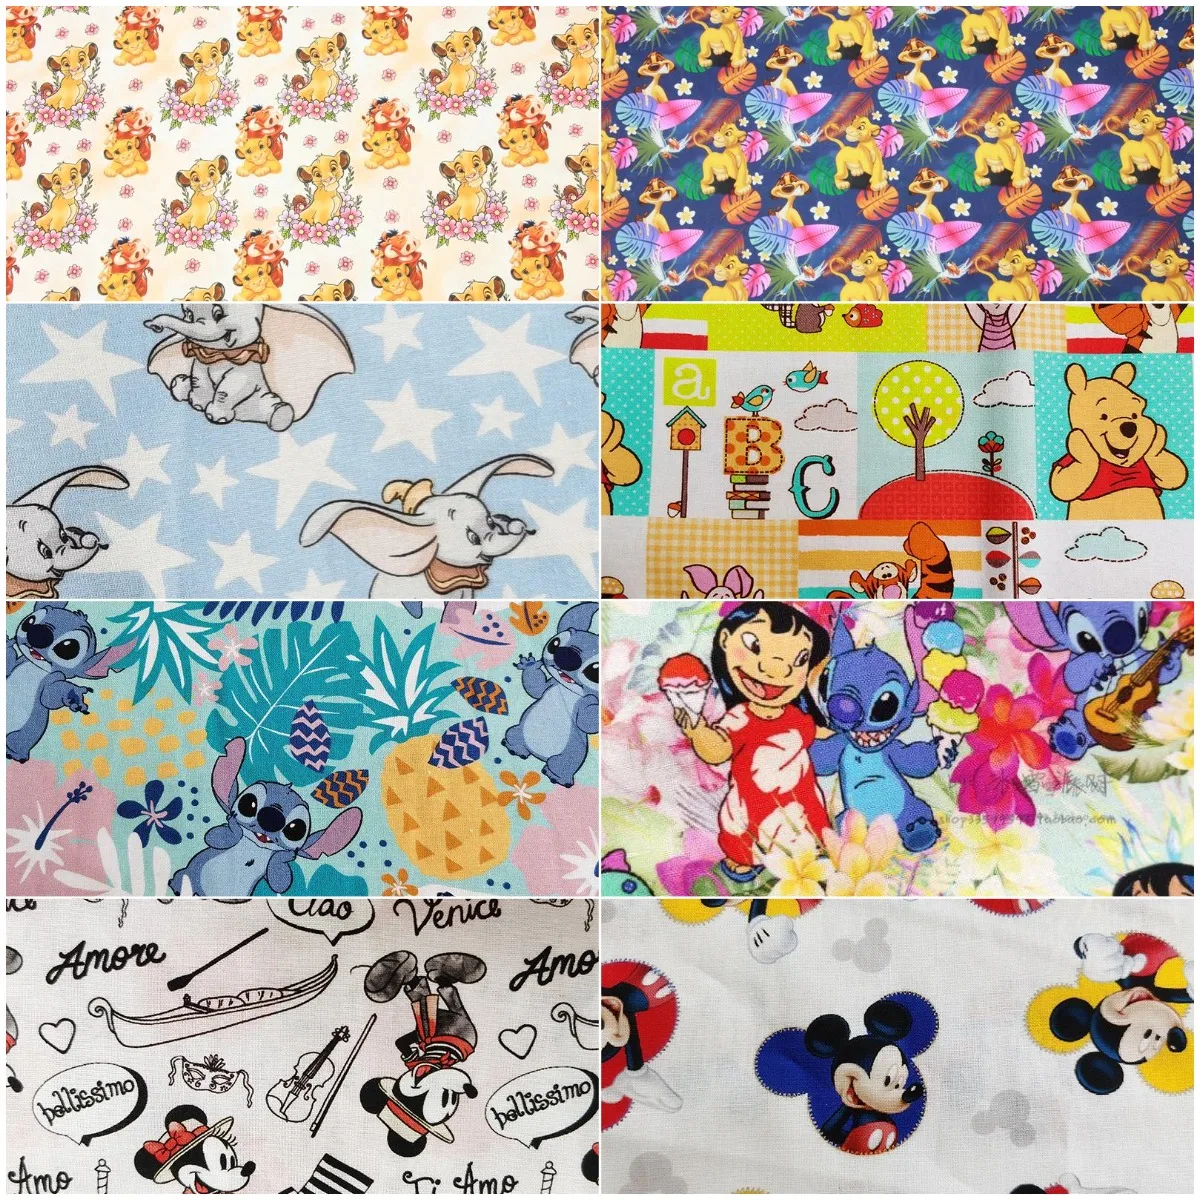 

Sale Disney The Lion King Winnie Dumbo Stitch Cotton Fabric Sew Patchwork Clothes Dress Fabric Material For Needlework Quilting